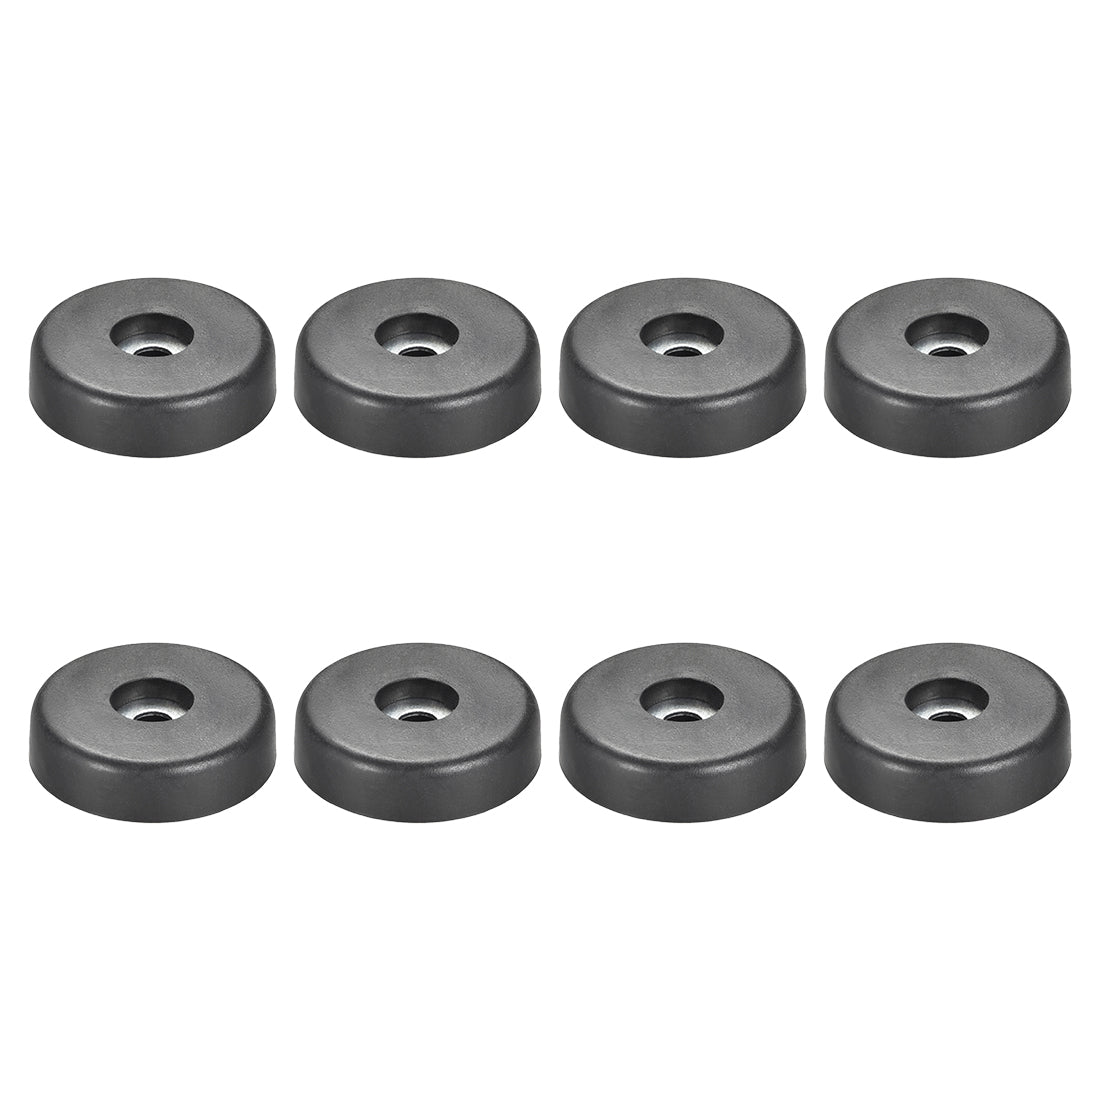 uxcell Uxcell 8 Pcs D40xH10mm Rubber Feet Anti-Vibration Base Pad Stand for Speaker Guitar Amplifier HiFi